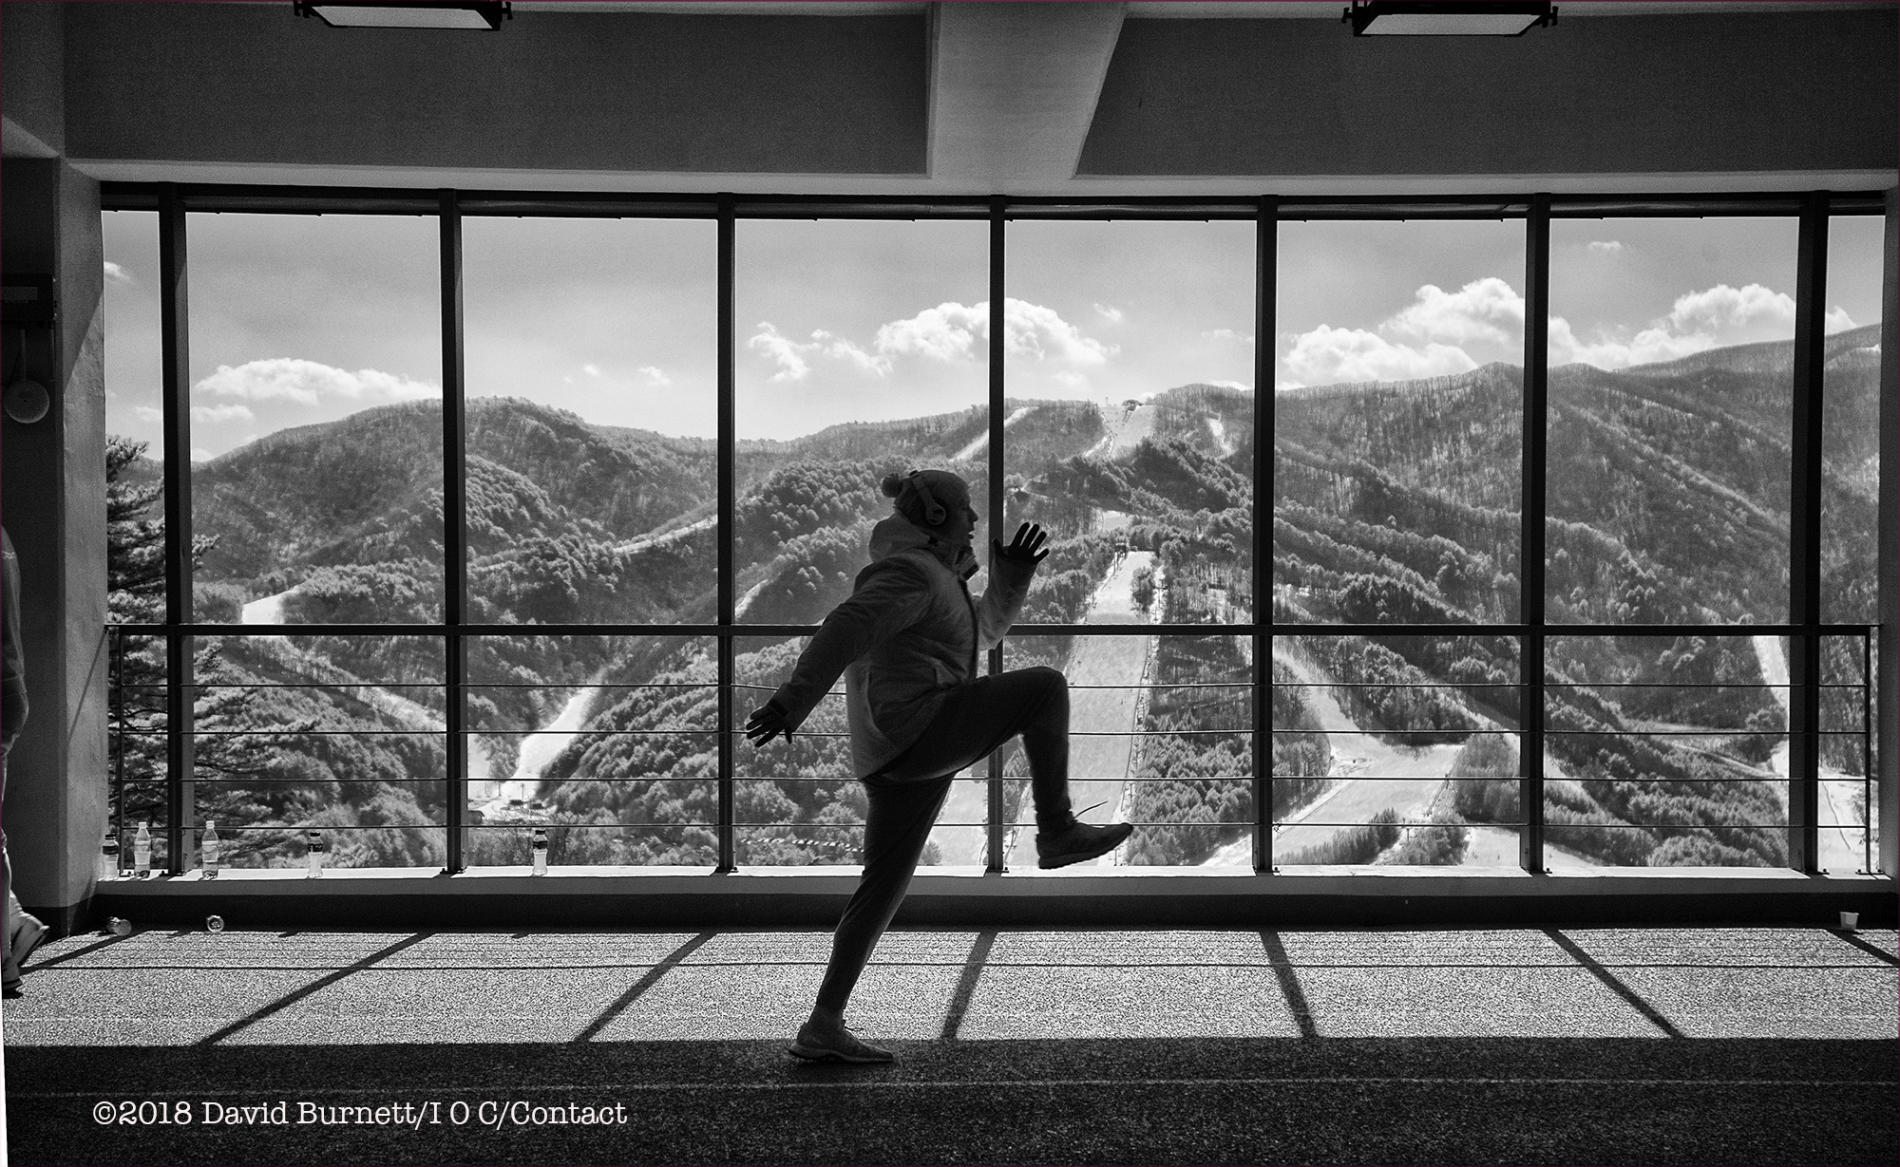 Bobsled warm up: Welcome to the Mountinans : Pyeongchang 2018 Winter Games : David Burnett | Photographer